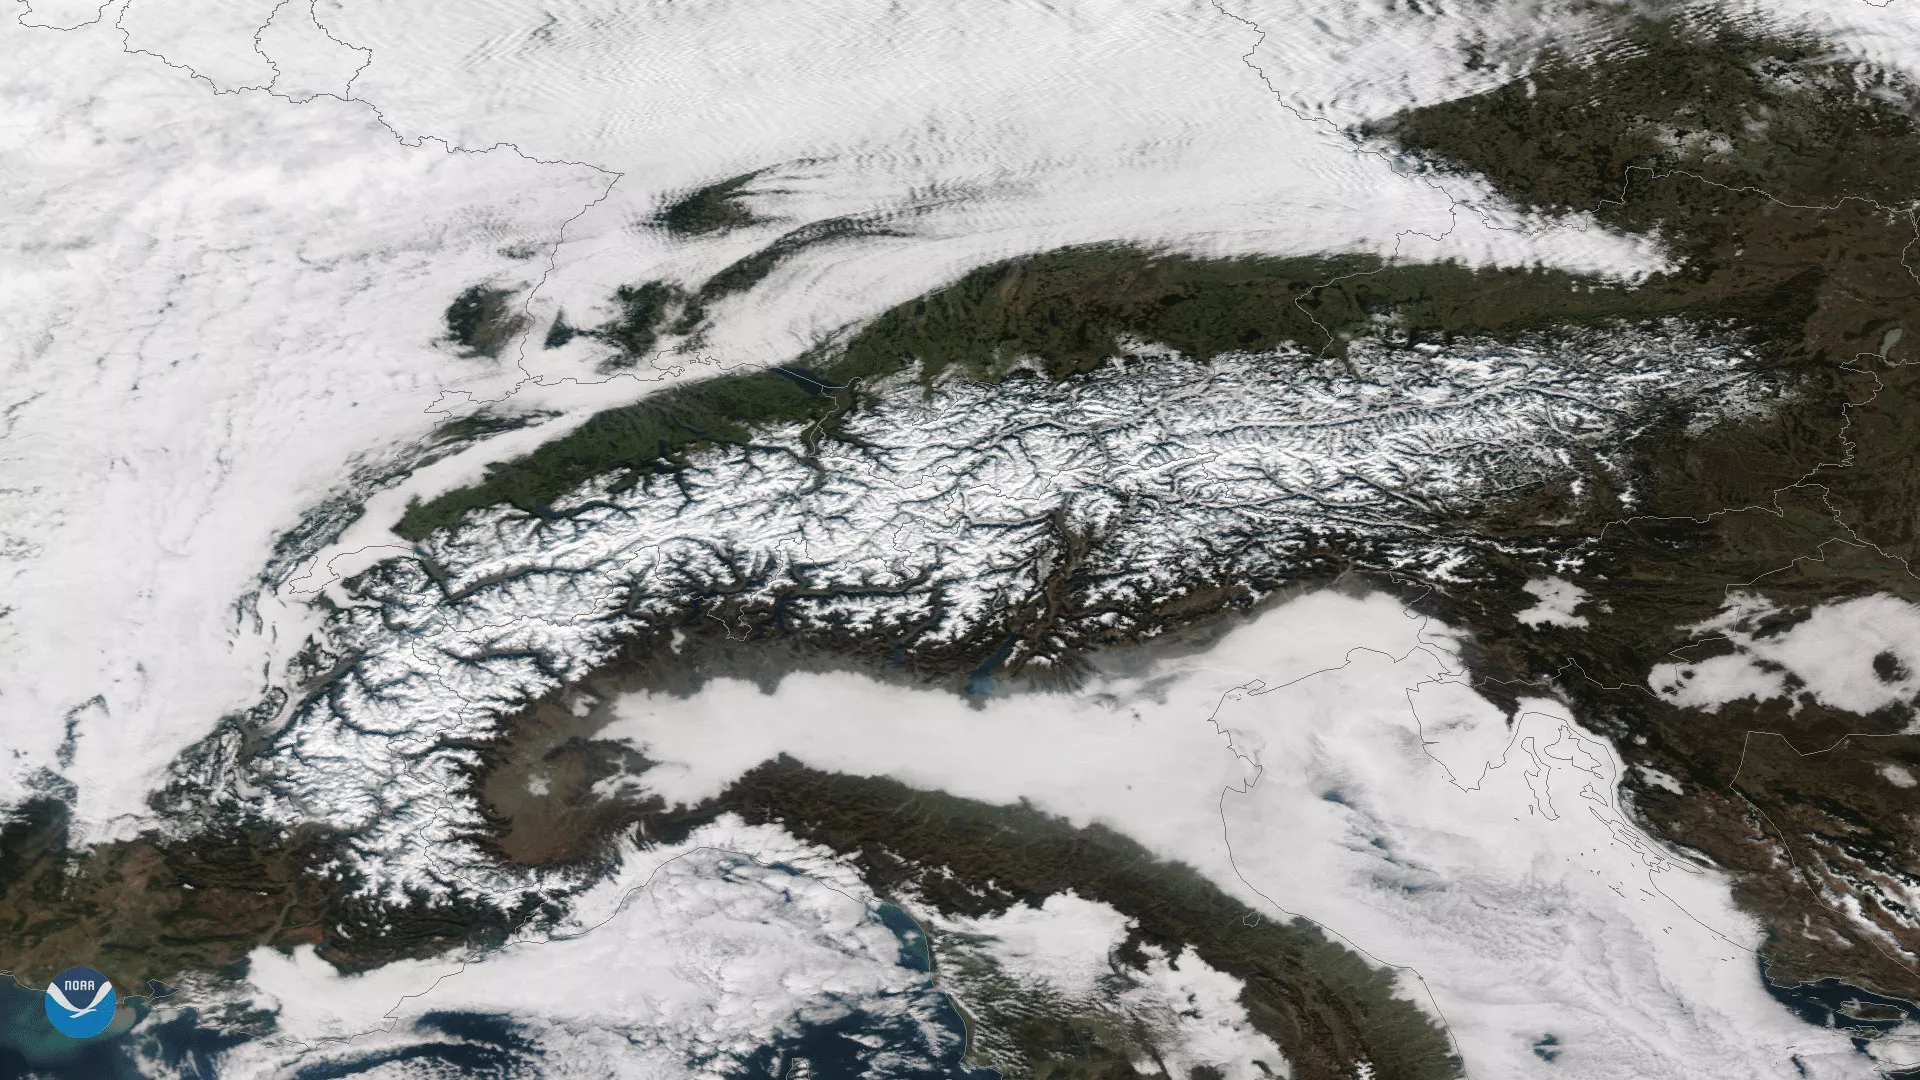 Clear skies reveal the snow-covered European Alps